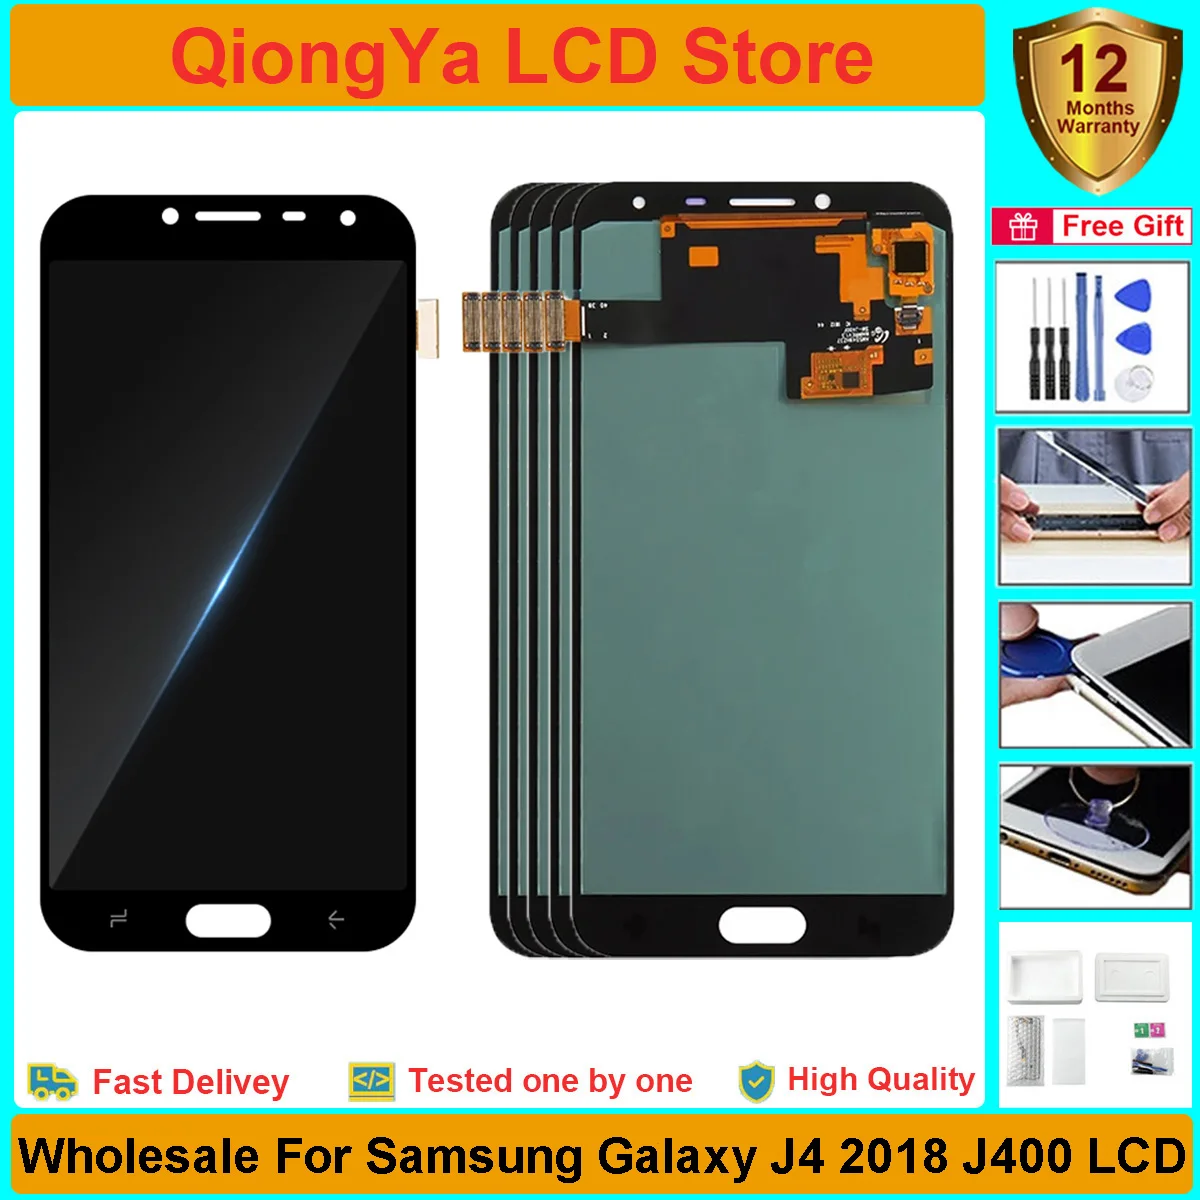 3/5 PCS Wholesale LCD For Samsung Galaxy J4 2018 J400 SM-J400F J400H J400M J400G/DS Display with Touch Screen Digitizer Assembly